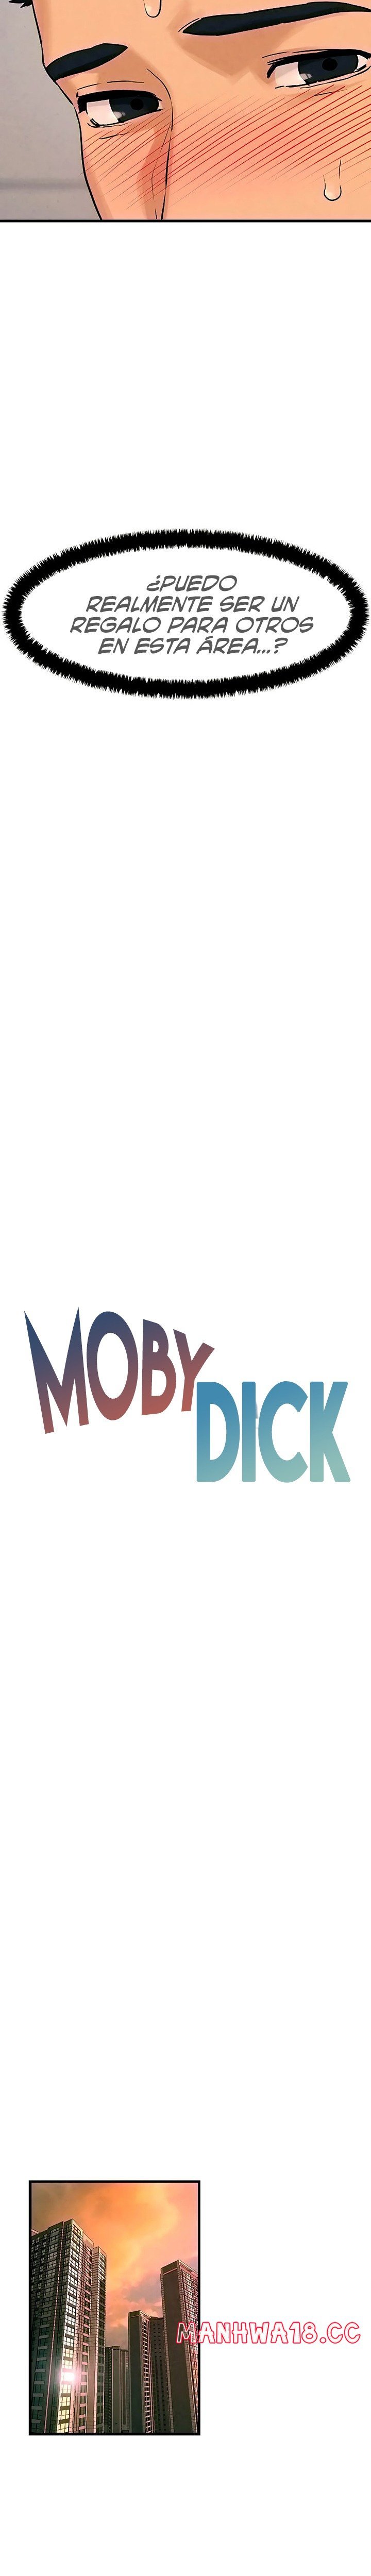 moby-dick-raw-chap-5-7